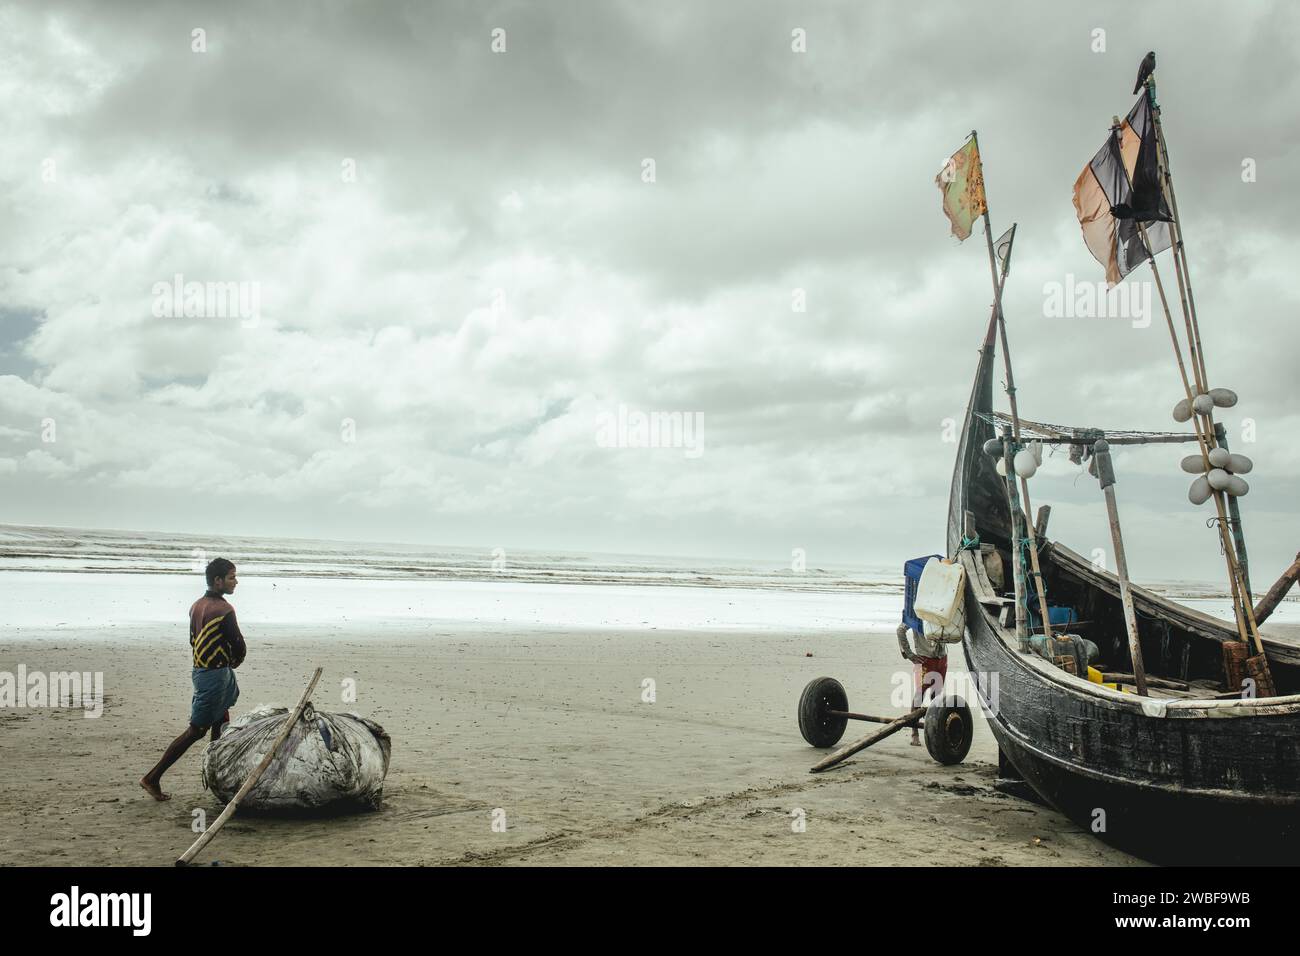 Fishing boat on the beach during a monsoon shower, Cox's Bazar, Bangladesh Stock Photo